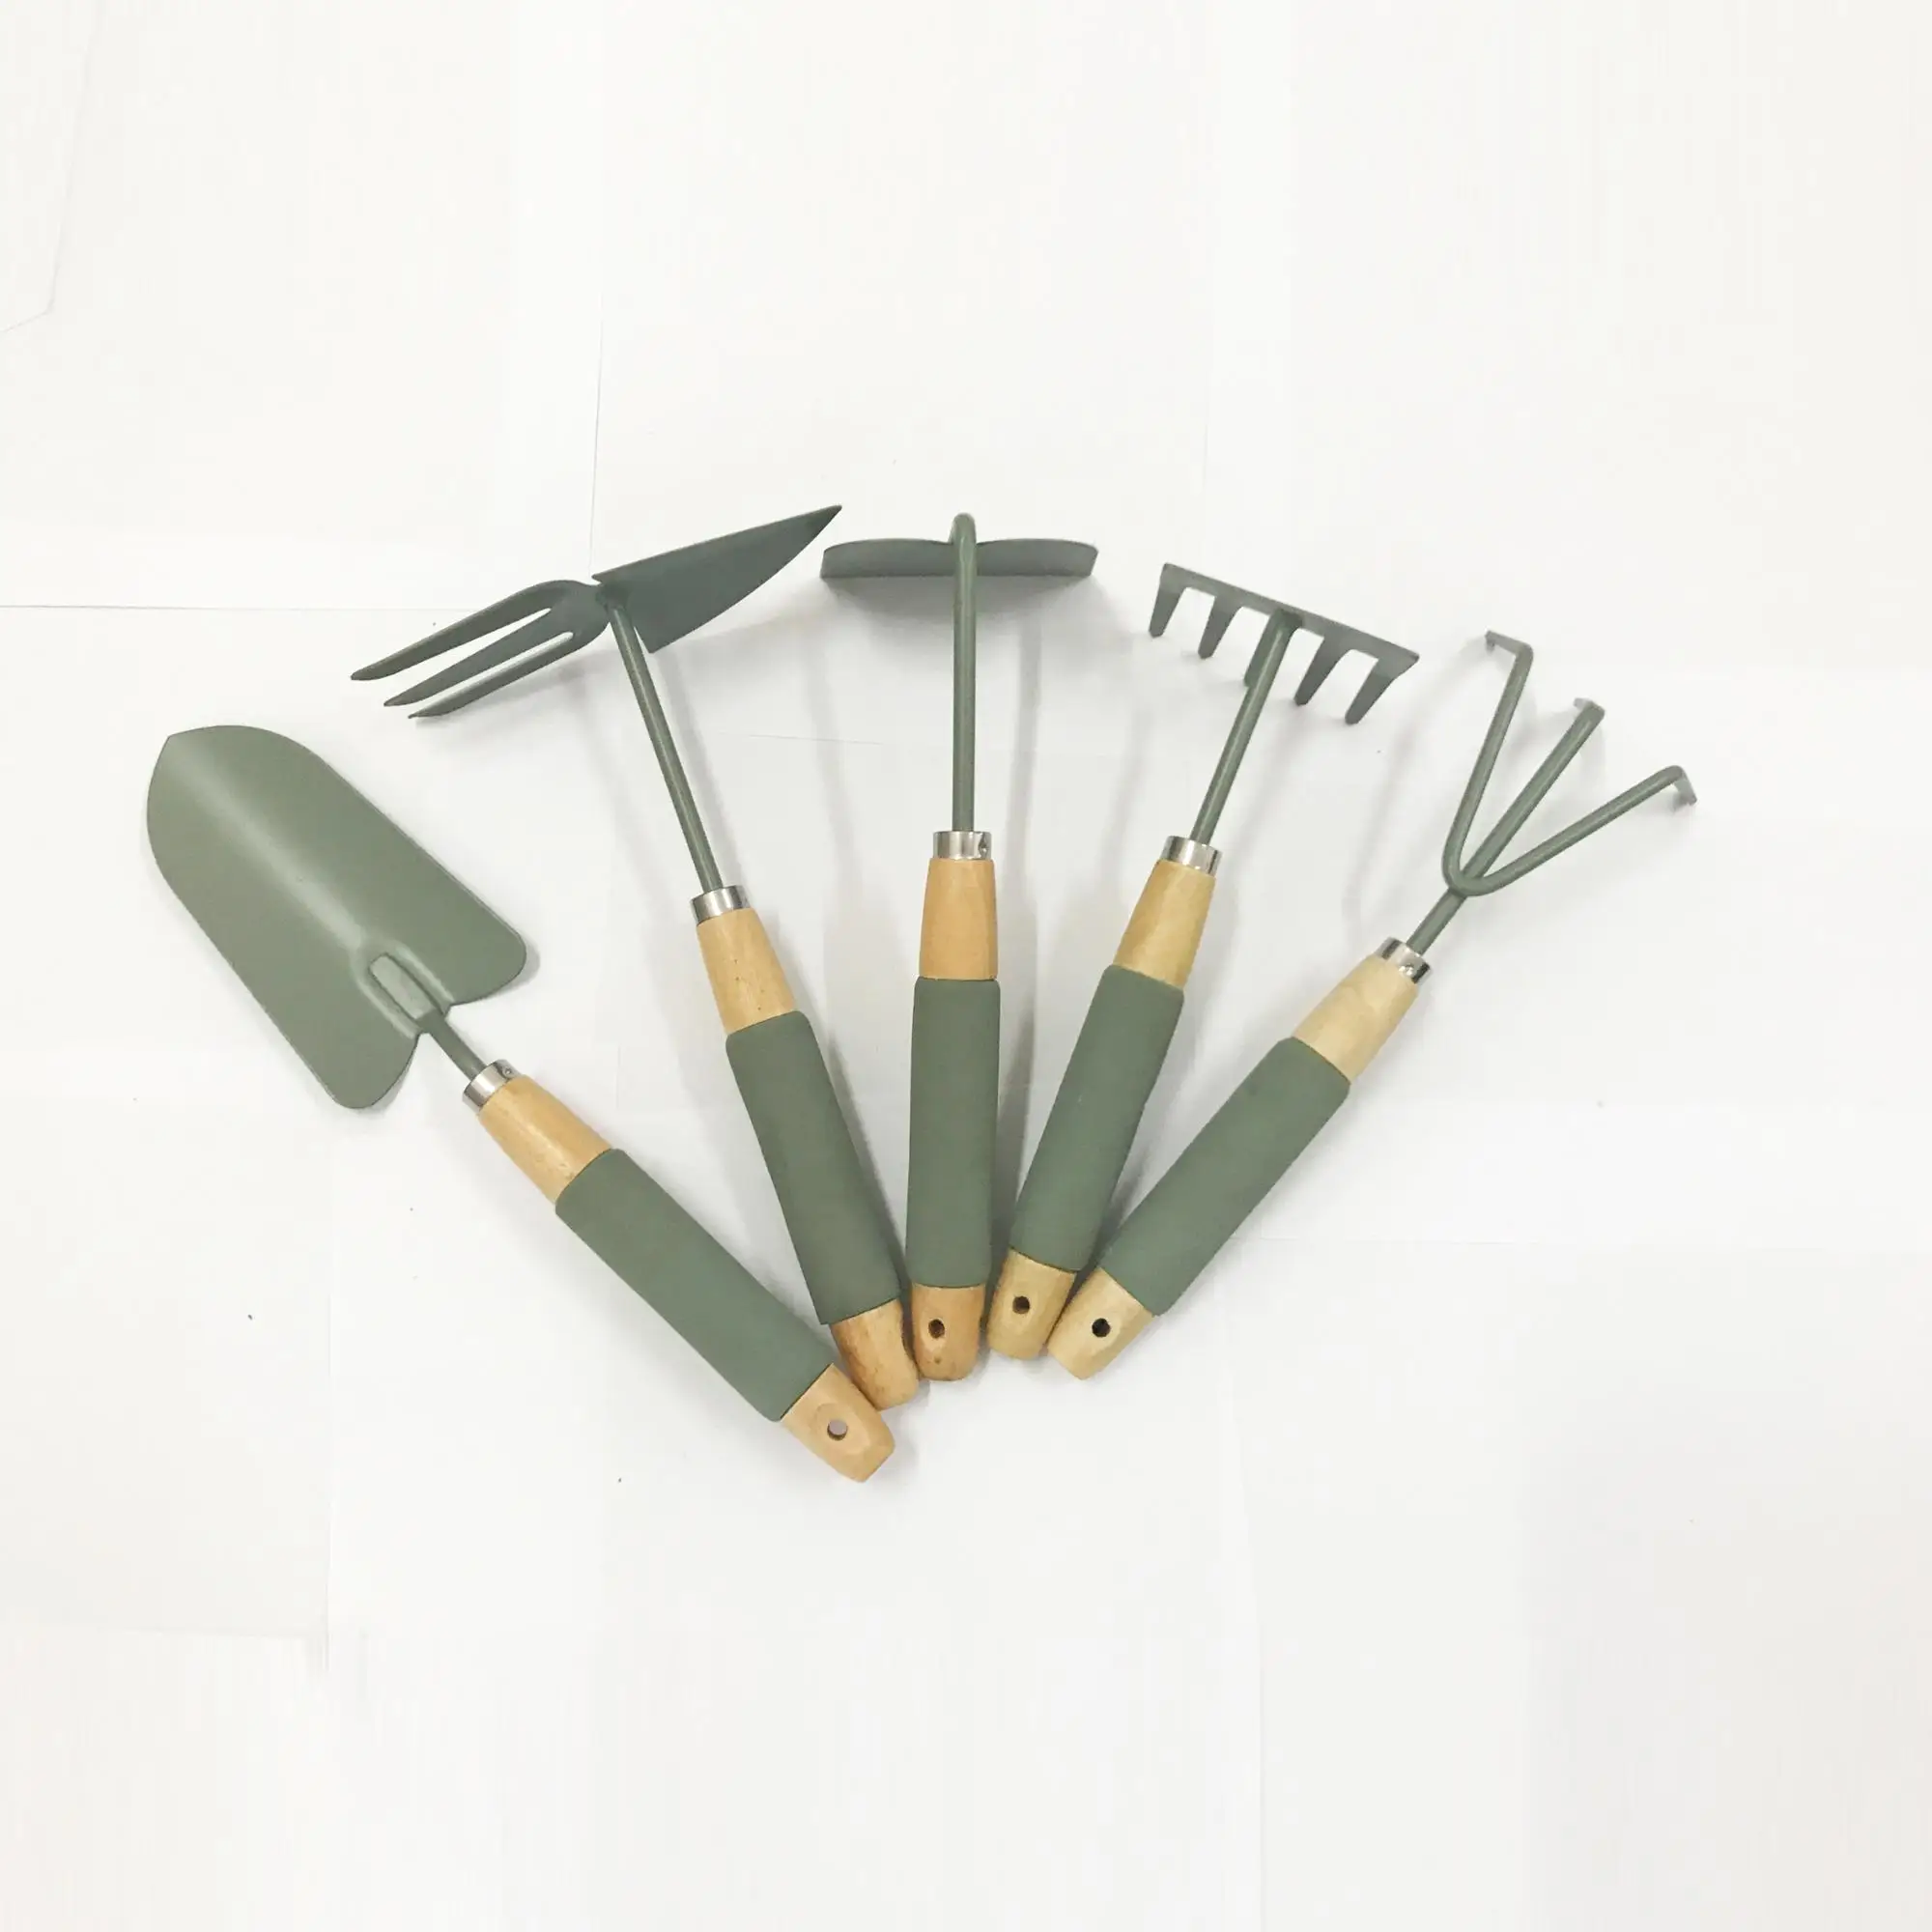 Chinese Supplier Gardening Set Tools With Bag - Buy Gardening Tools ...